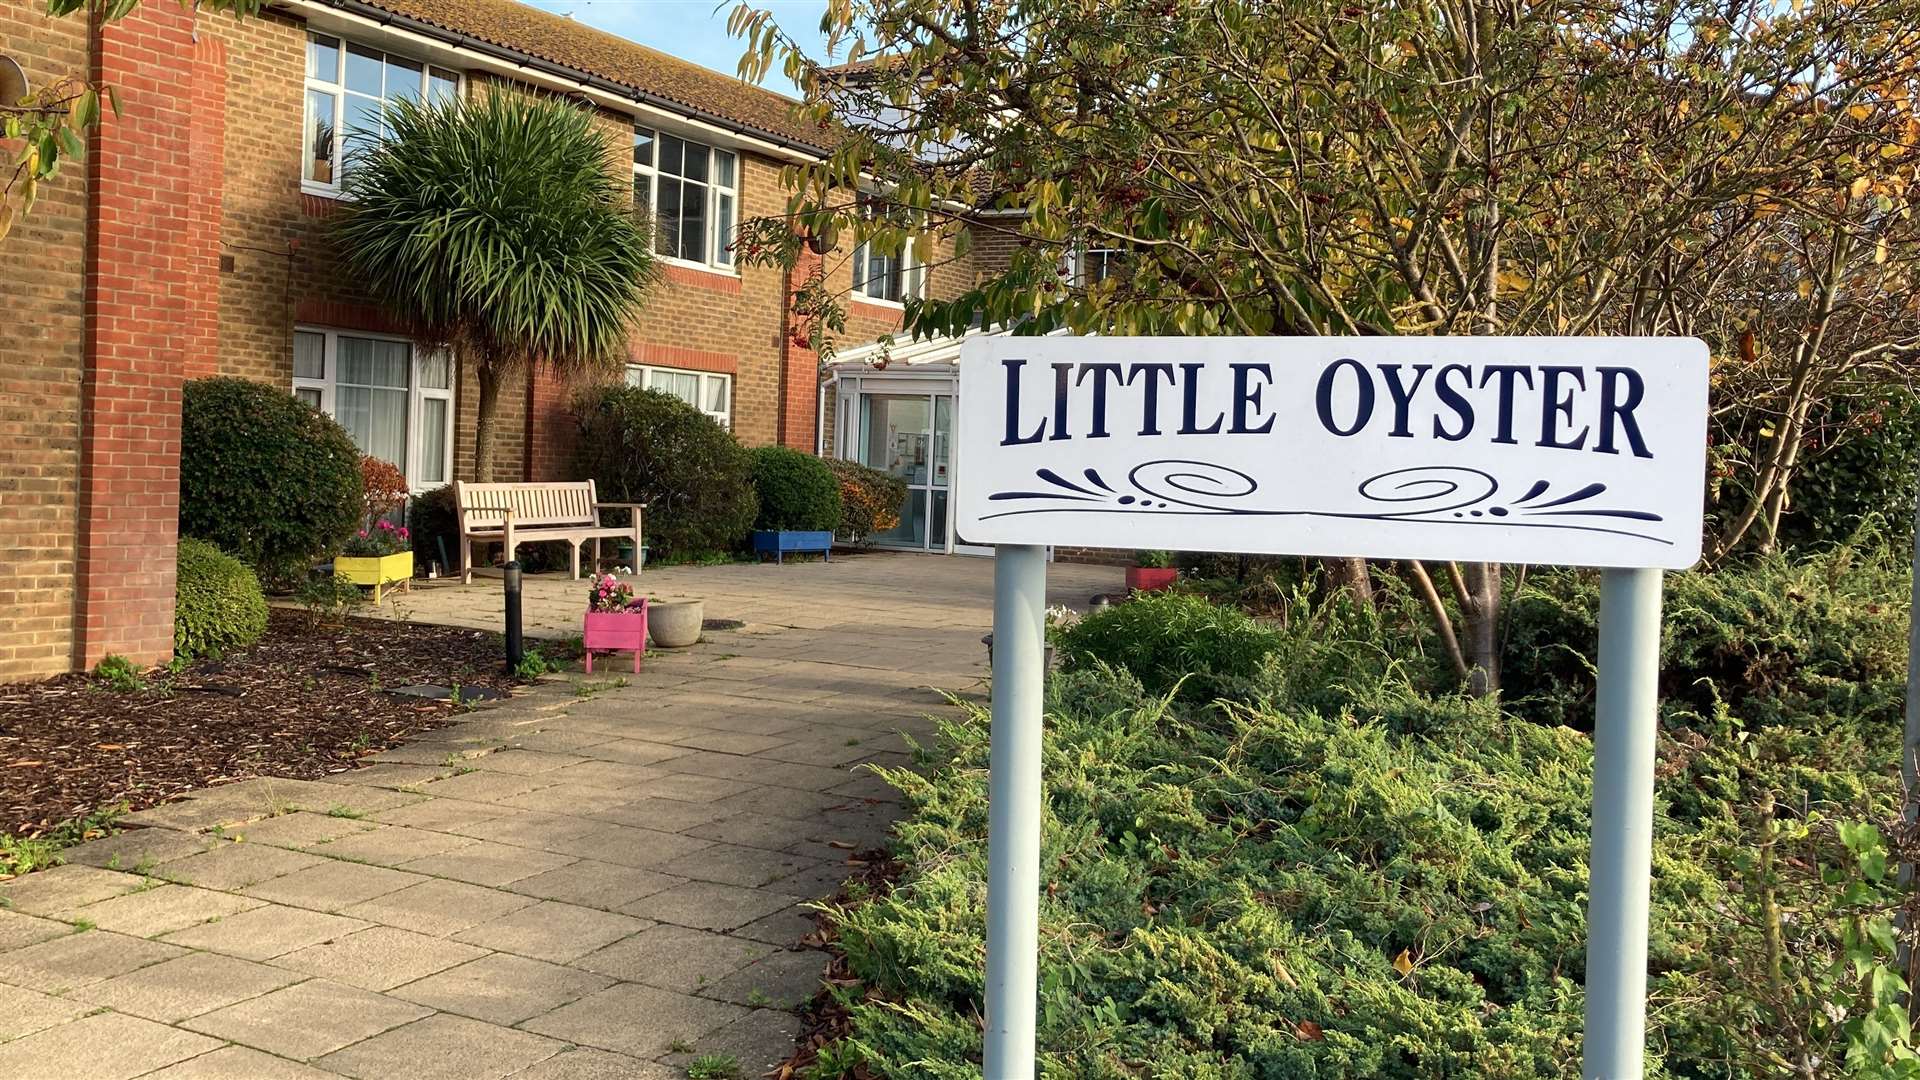 The Little Oyster residential home